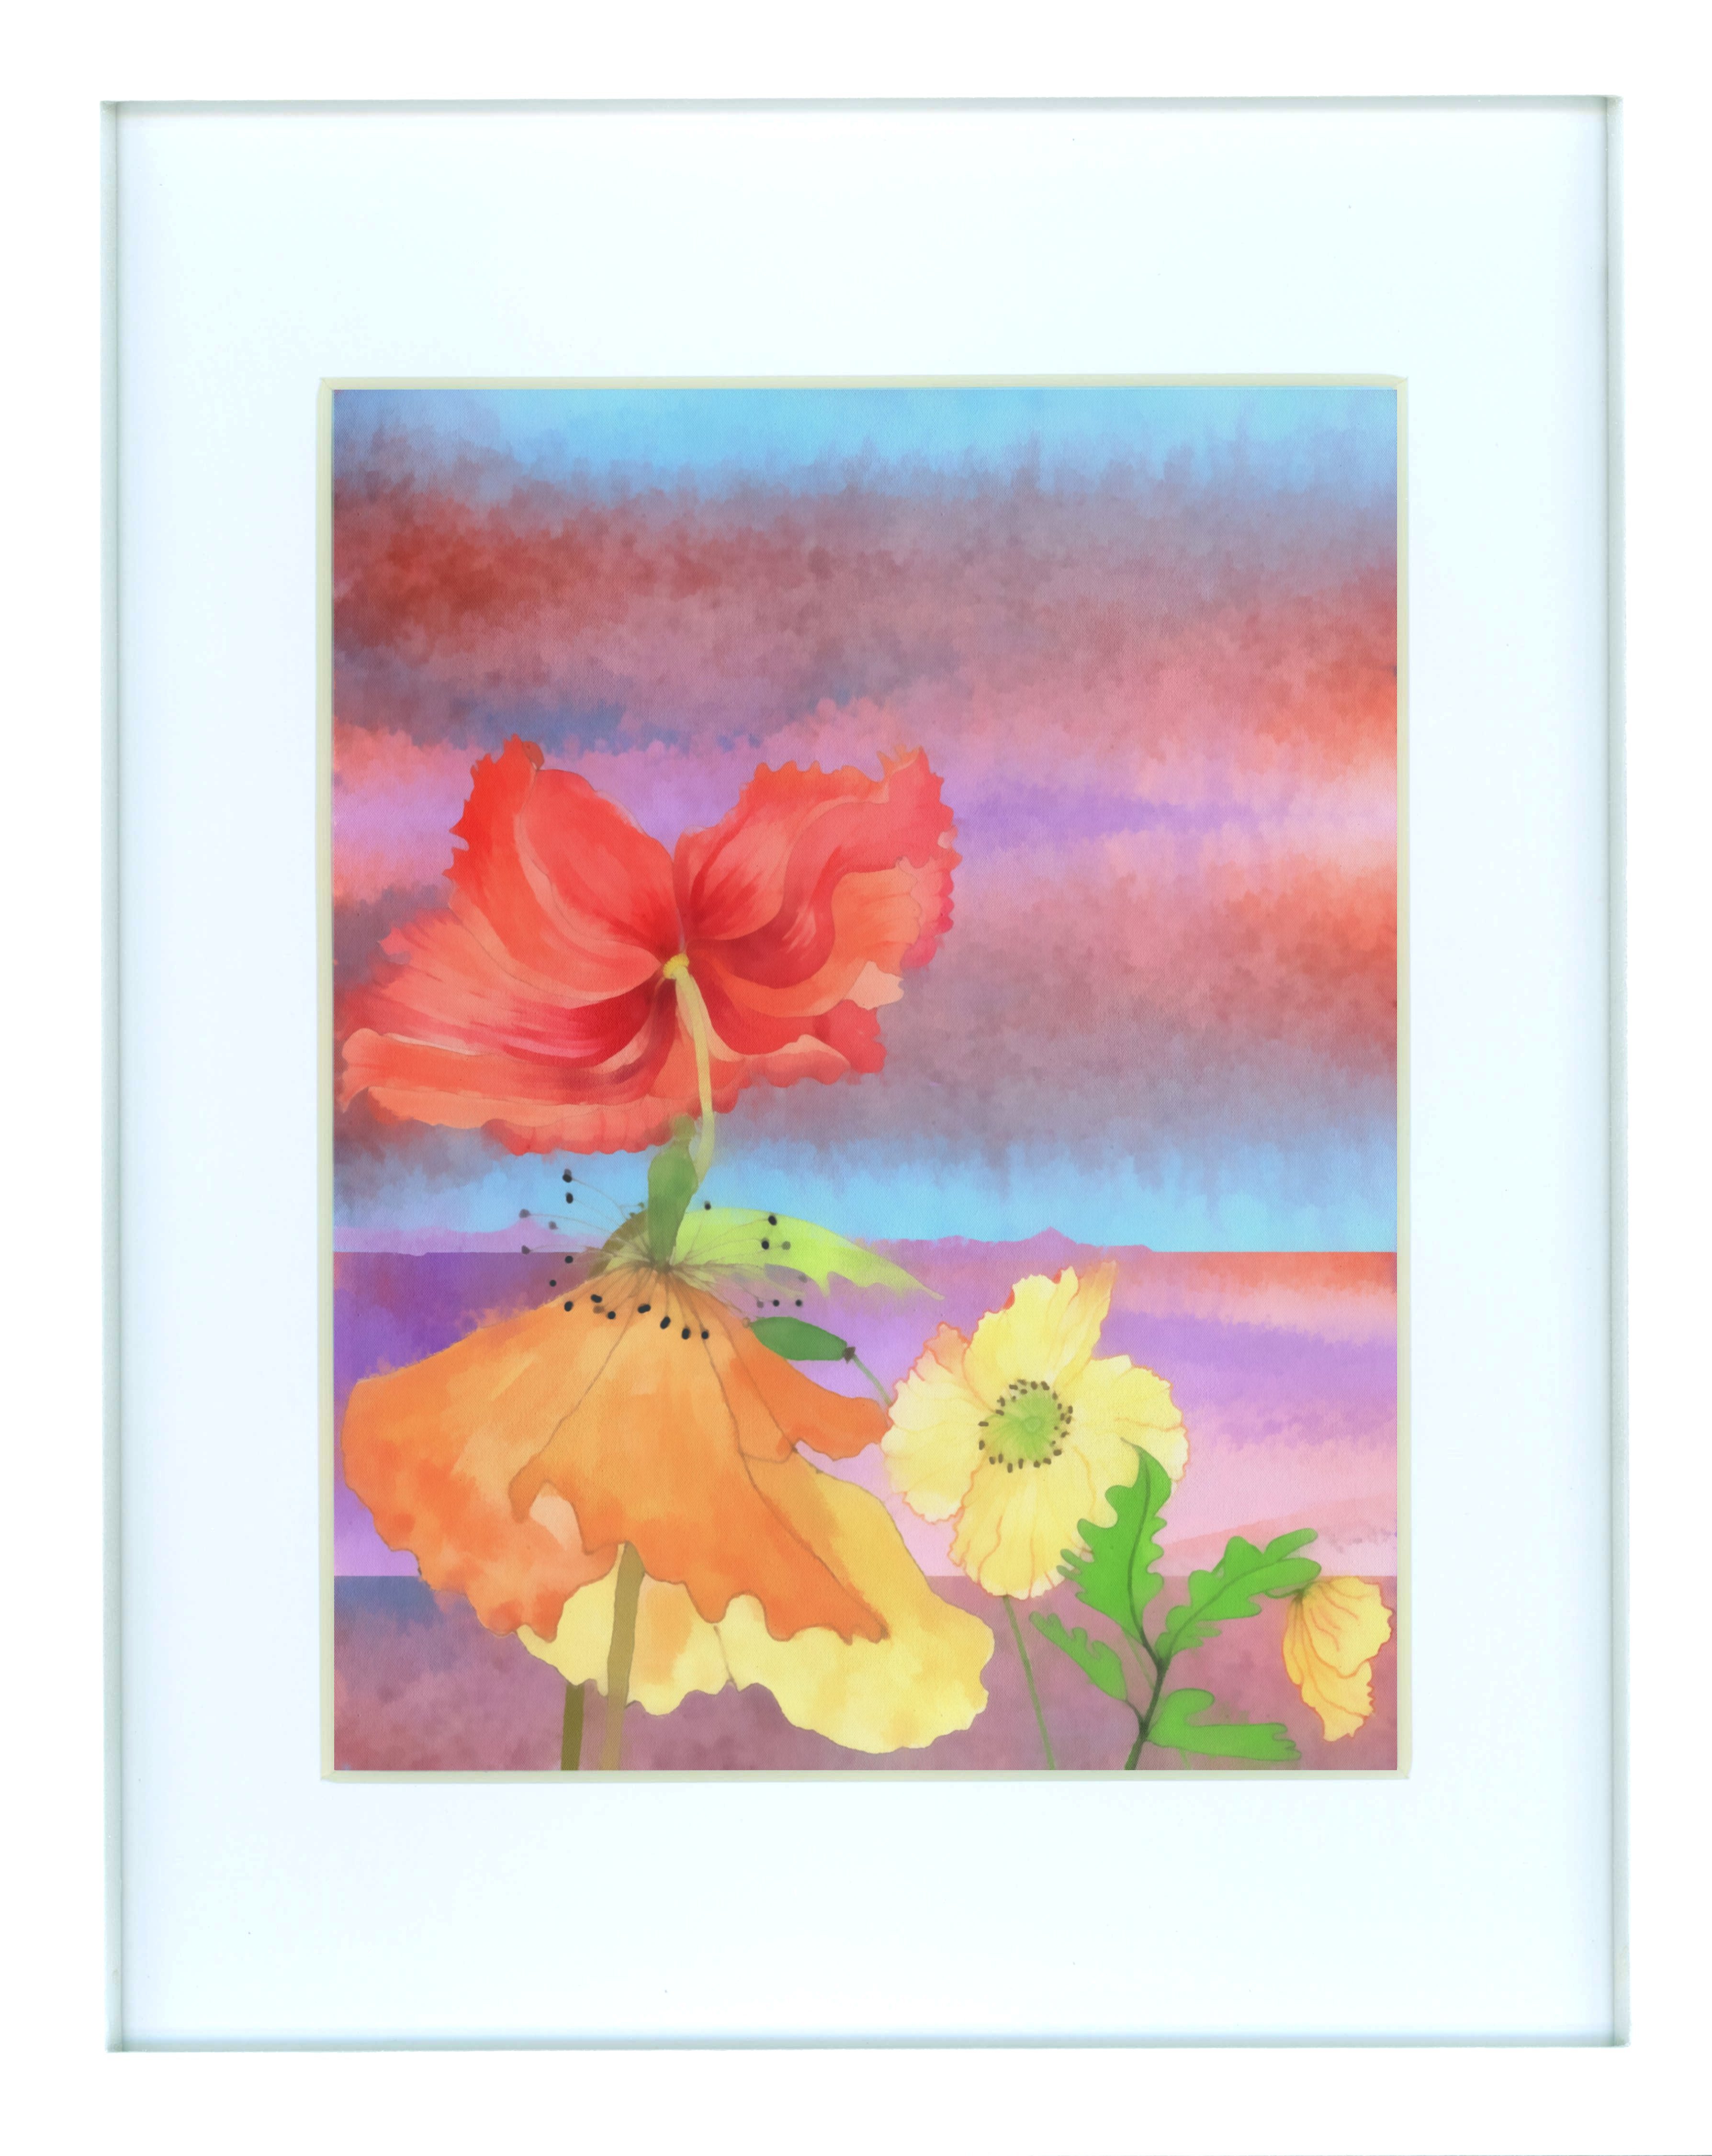 To Order this Framed Art Click 'Add to Cart' Button